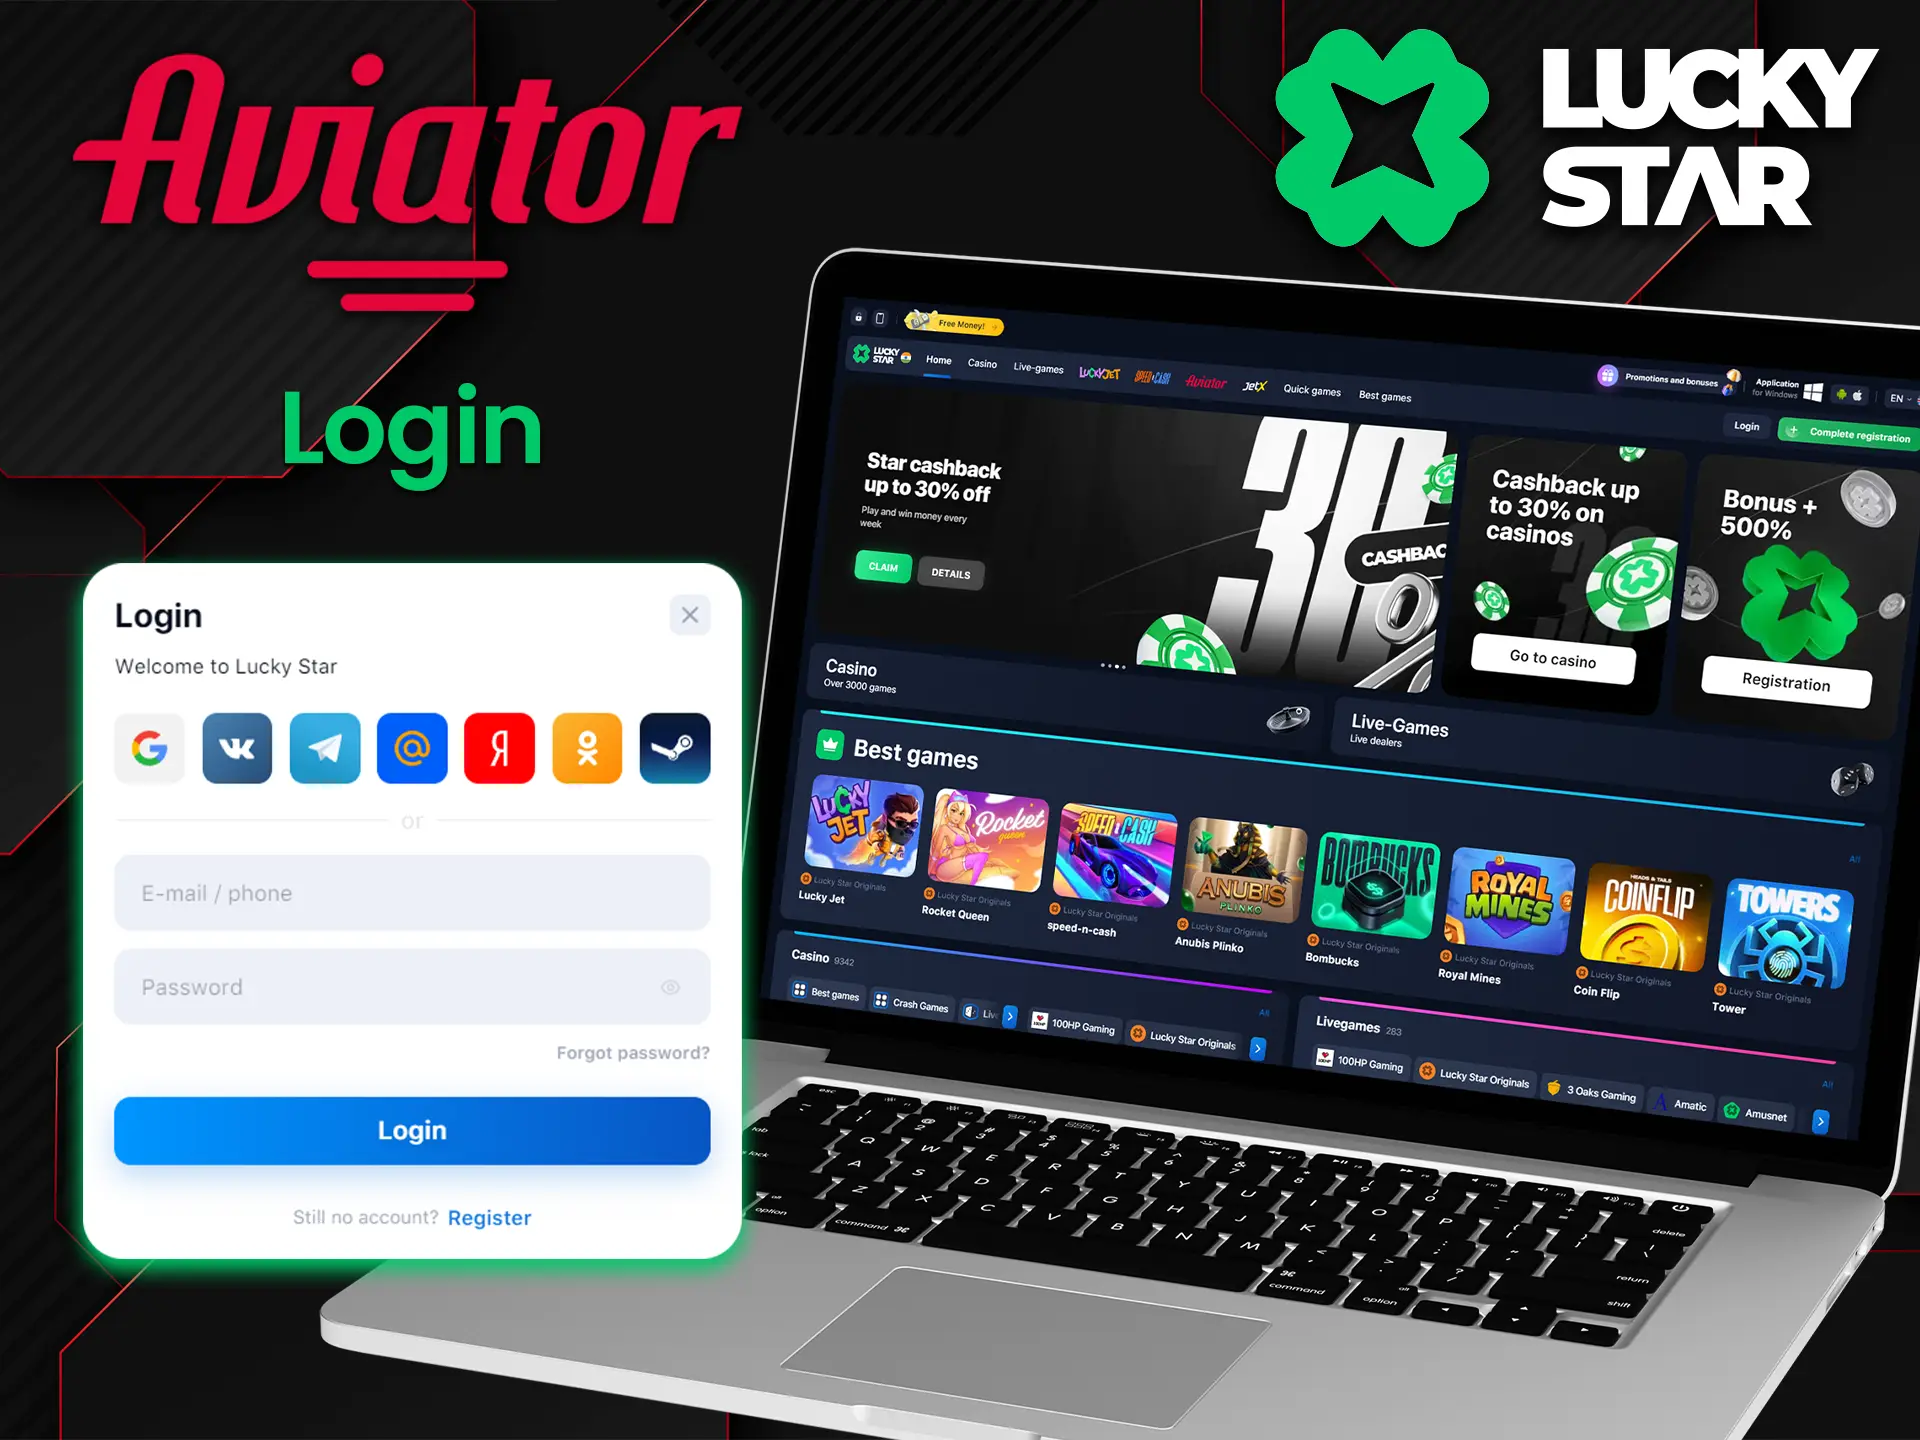 Quick login to Lucky Star Aviator is available via social media.